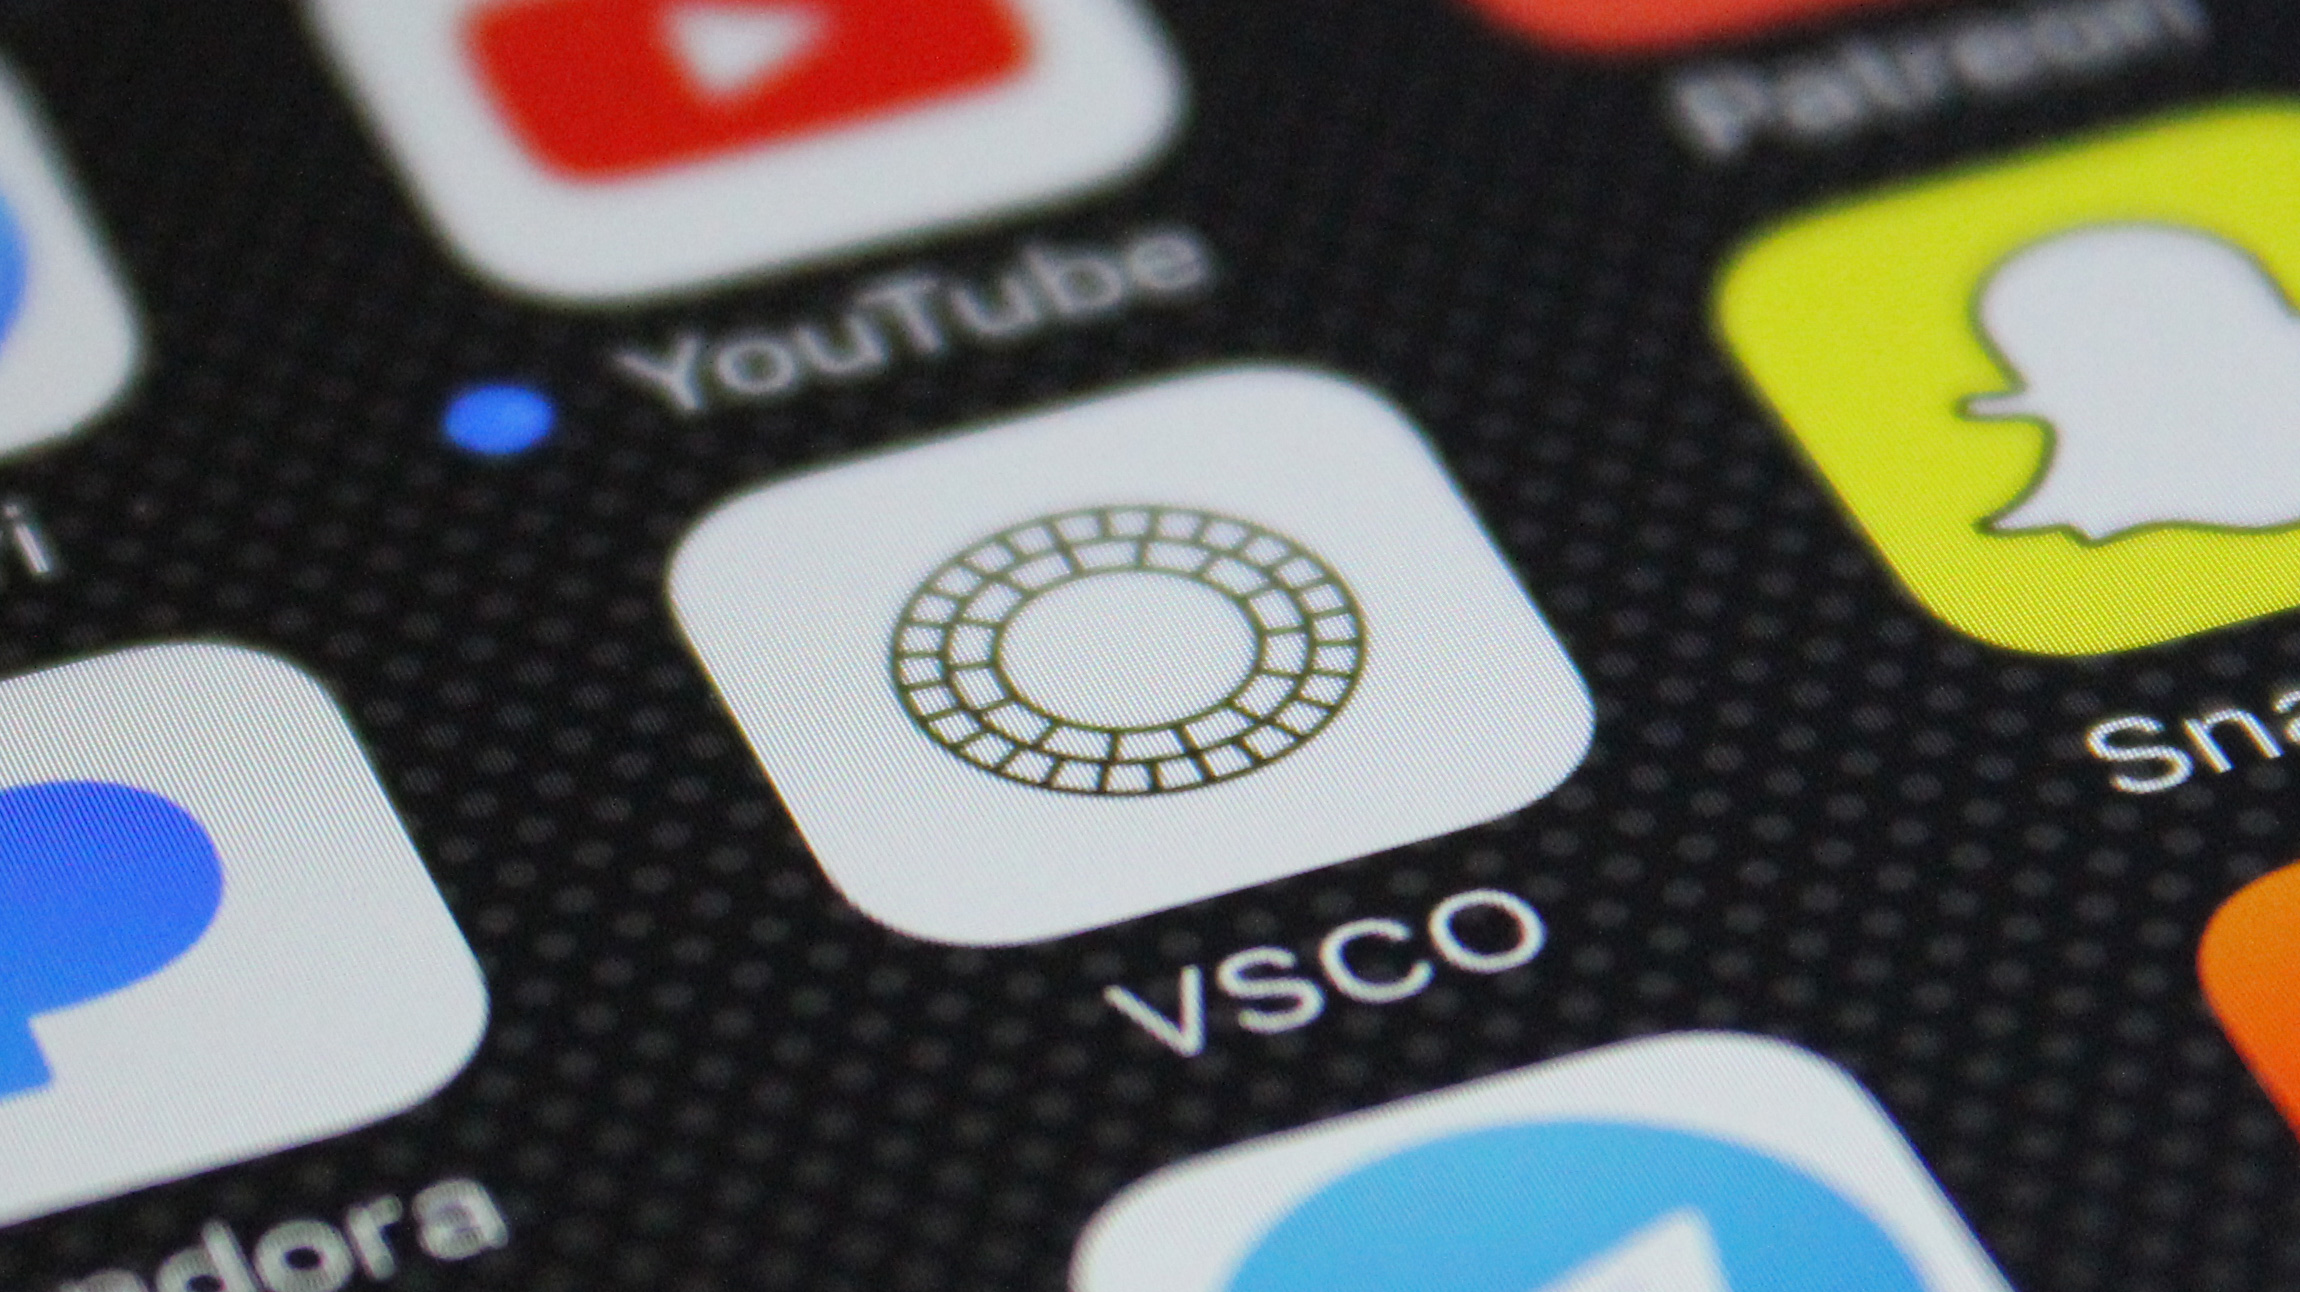 Vsco S New Editing Tool Montage Lets You Edit And Layer Both Photos And Video Techcrunch